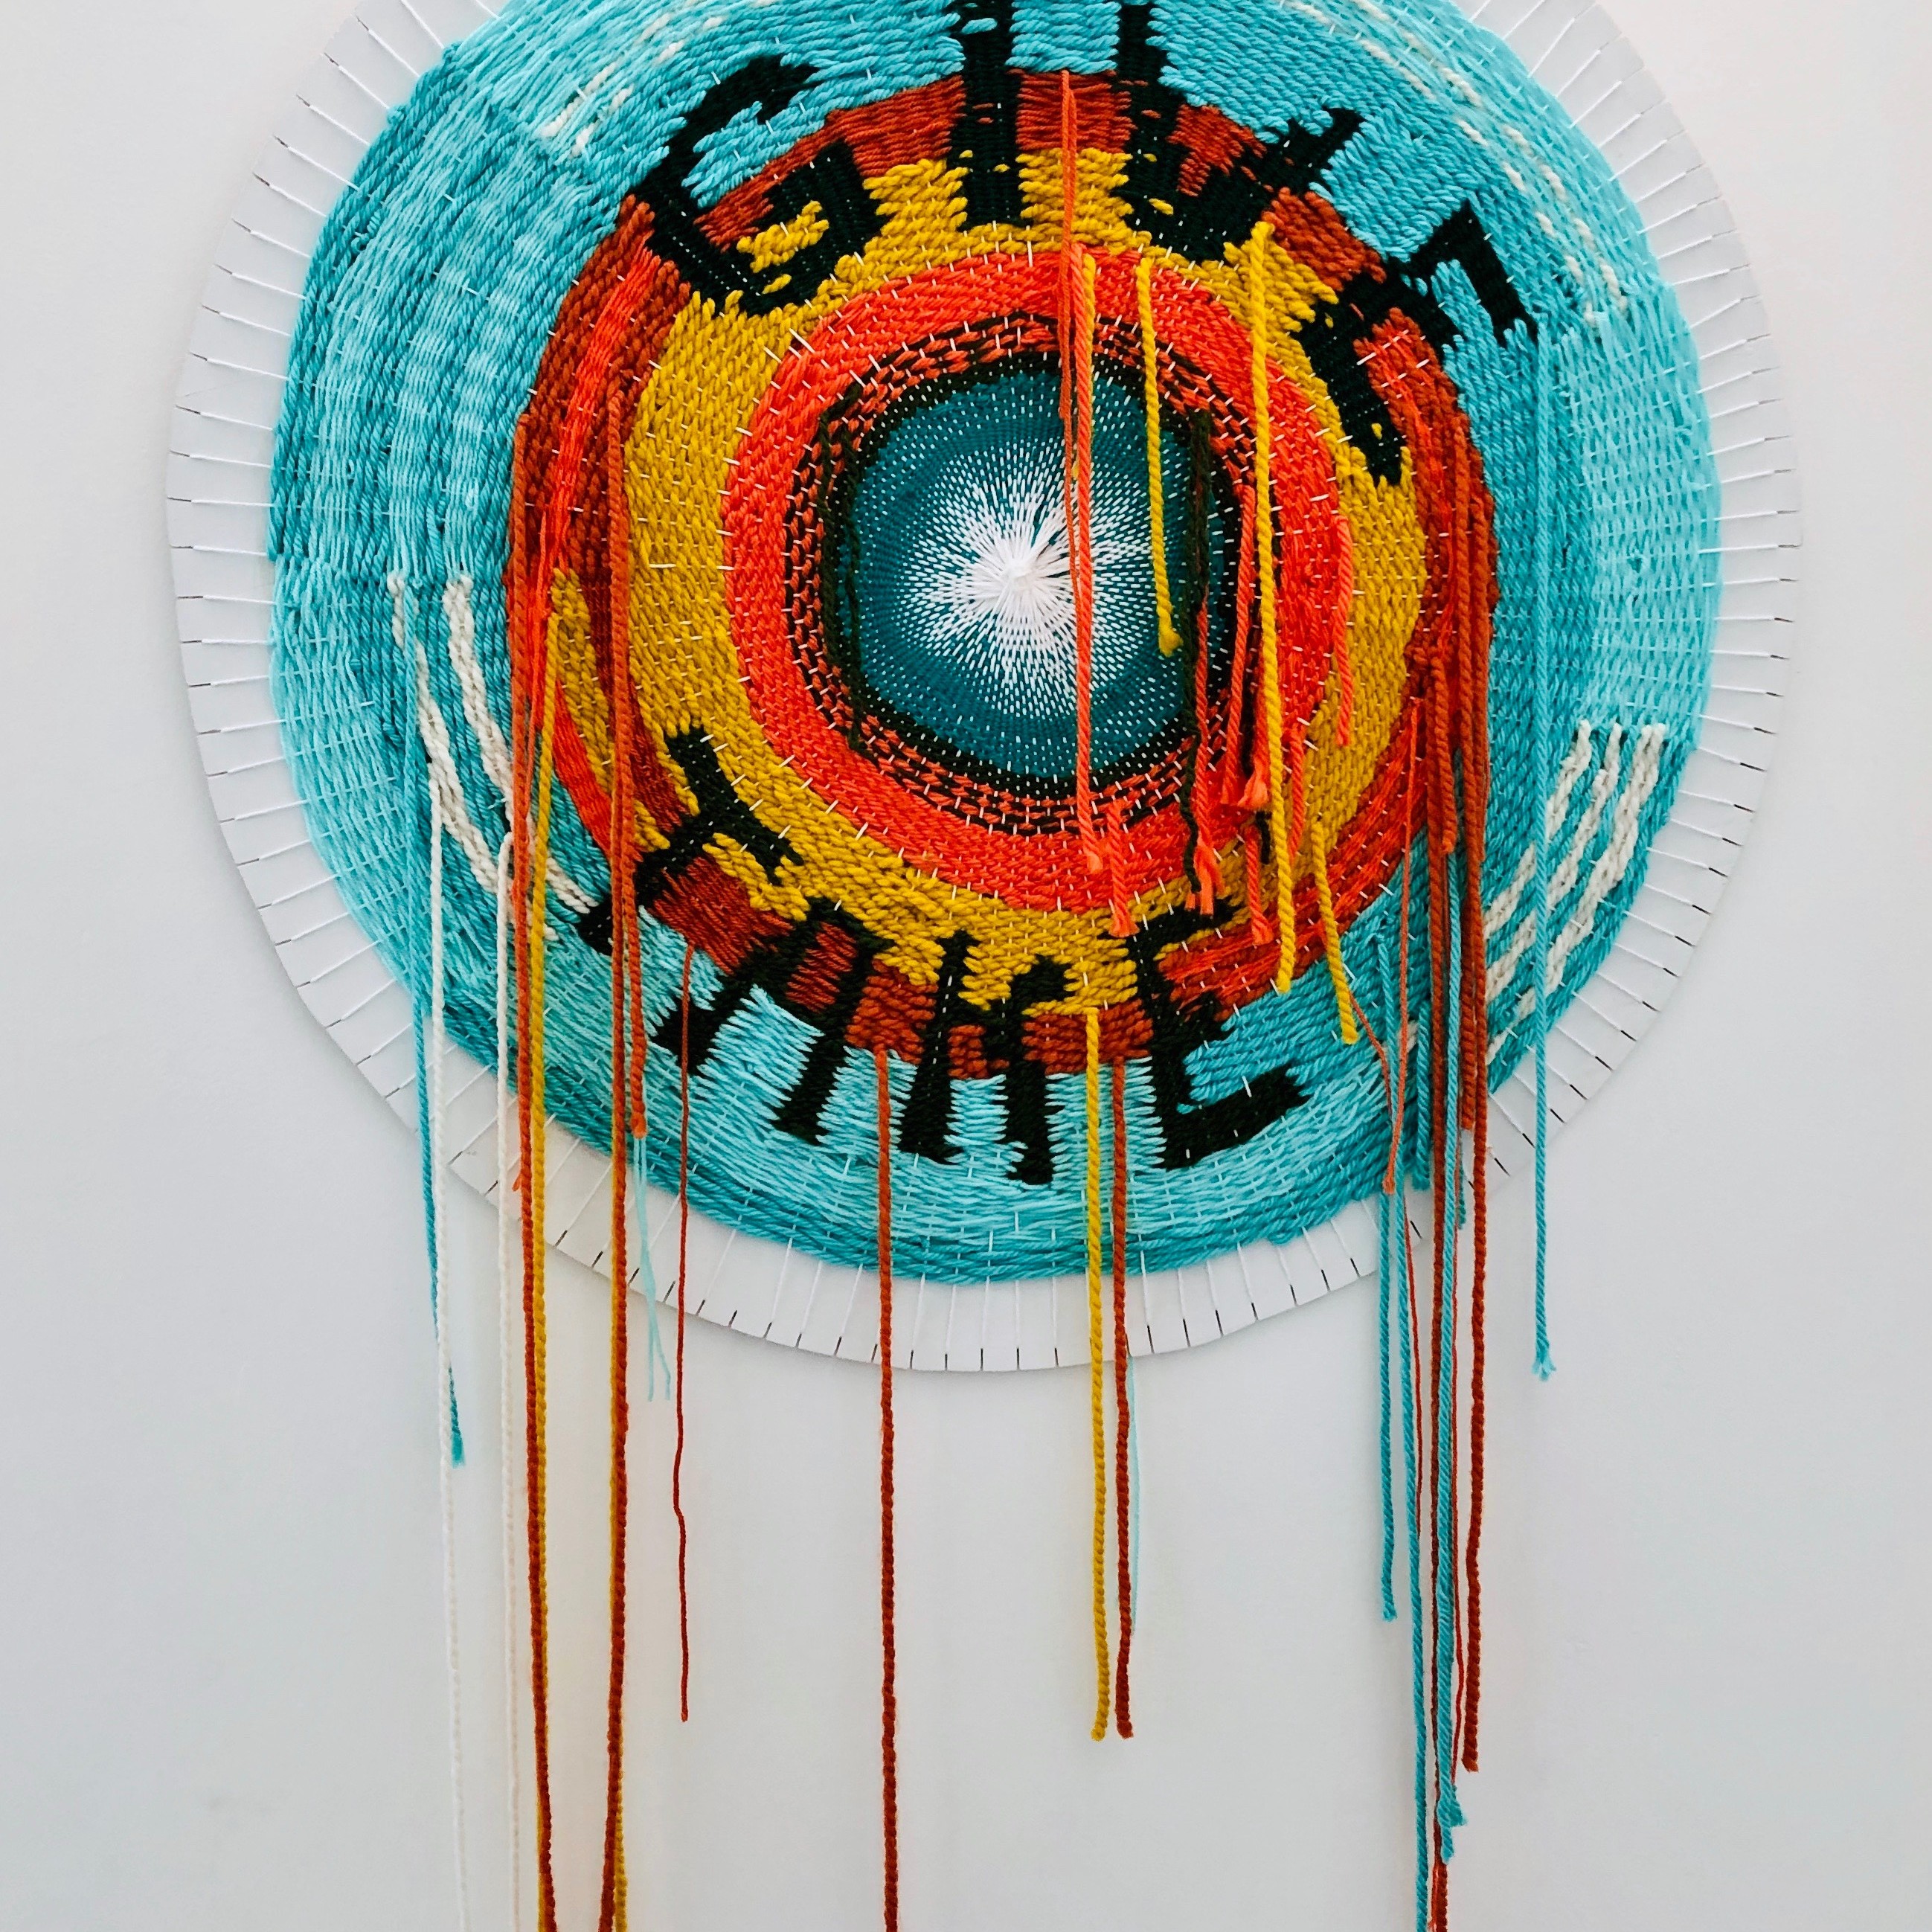 Give and Take - 2019 | Acrylic, Wool, Wood | 36 in